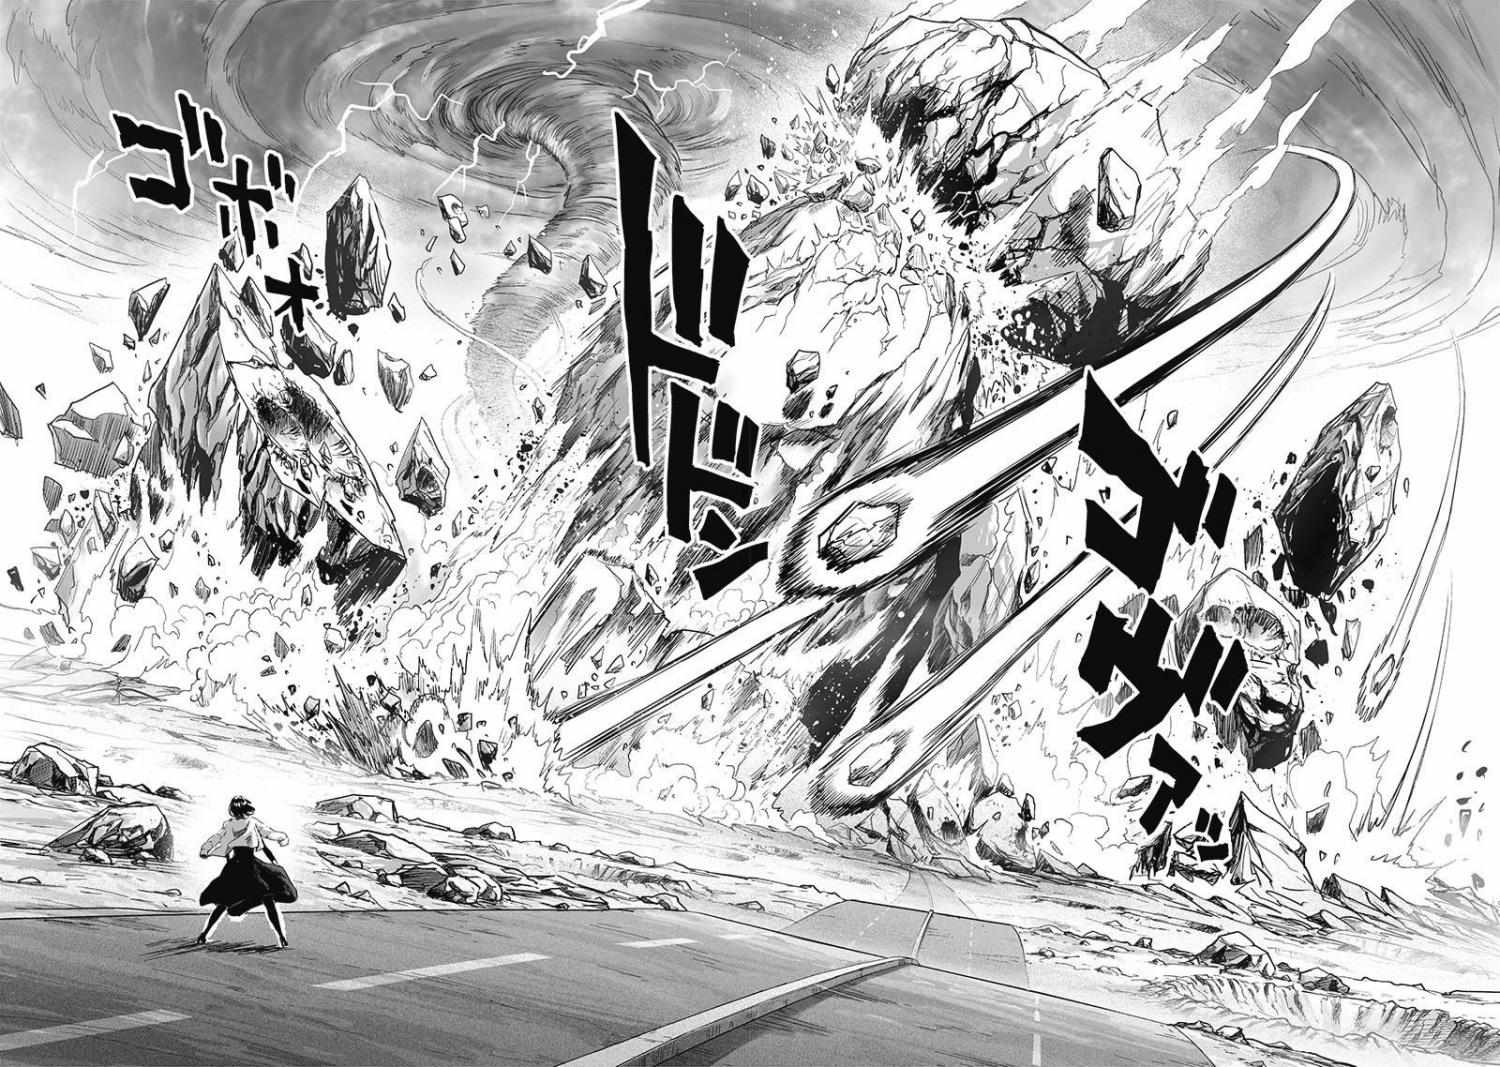 One Punch Man Chapter 181, READ One Punch Man Chapter 181 ONLINE, lost in the cloud genre,lost in the cloud gif,lost in the cloud girl,lost in the cloud goods,lost in the cloud goodreads,lost in the cloud,lost ark cloud gaming,lost odyssey cloud gaming,lost in the cloud fanart,lost in the cloud fanfic,lost in the cloud fandom,lost in the cloud first kiss,lost in the cloud font,lost in the cloud ending,lost in the cloud episode 97,lost in the cloud edit,lost in the cloud explained,lost in the cloud dog,lost in the cloud discord server,lost in the cloud desktop wallpaper,lost in the cloud drawing,can't find my cloud on network,lost in the cloud characters,lost in the cloud chapter 93 release date,lost in the cloud birthday,lost in the cloud birthday art,lost in the cloud background,lost in the cloud banner,lost in the clouds meaning,what is the black cloud in lost,lost in the cloud ao3,lost in the cloud anime,lost in the cloud art,lost in the cloud author twitter,lost in the cloud author instagram,lost in the cloud artist,lost in the cloud acrylic stand,lost in the cloud artist twitter,lost in the cloud art style,lost in the cloud analysis